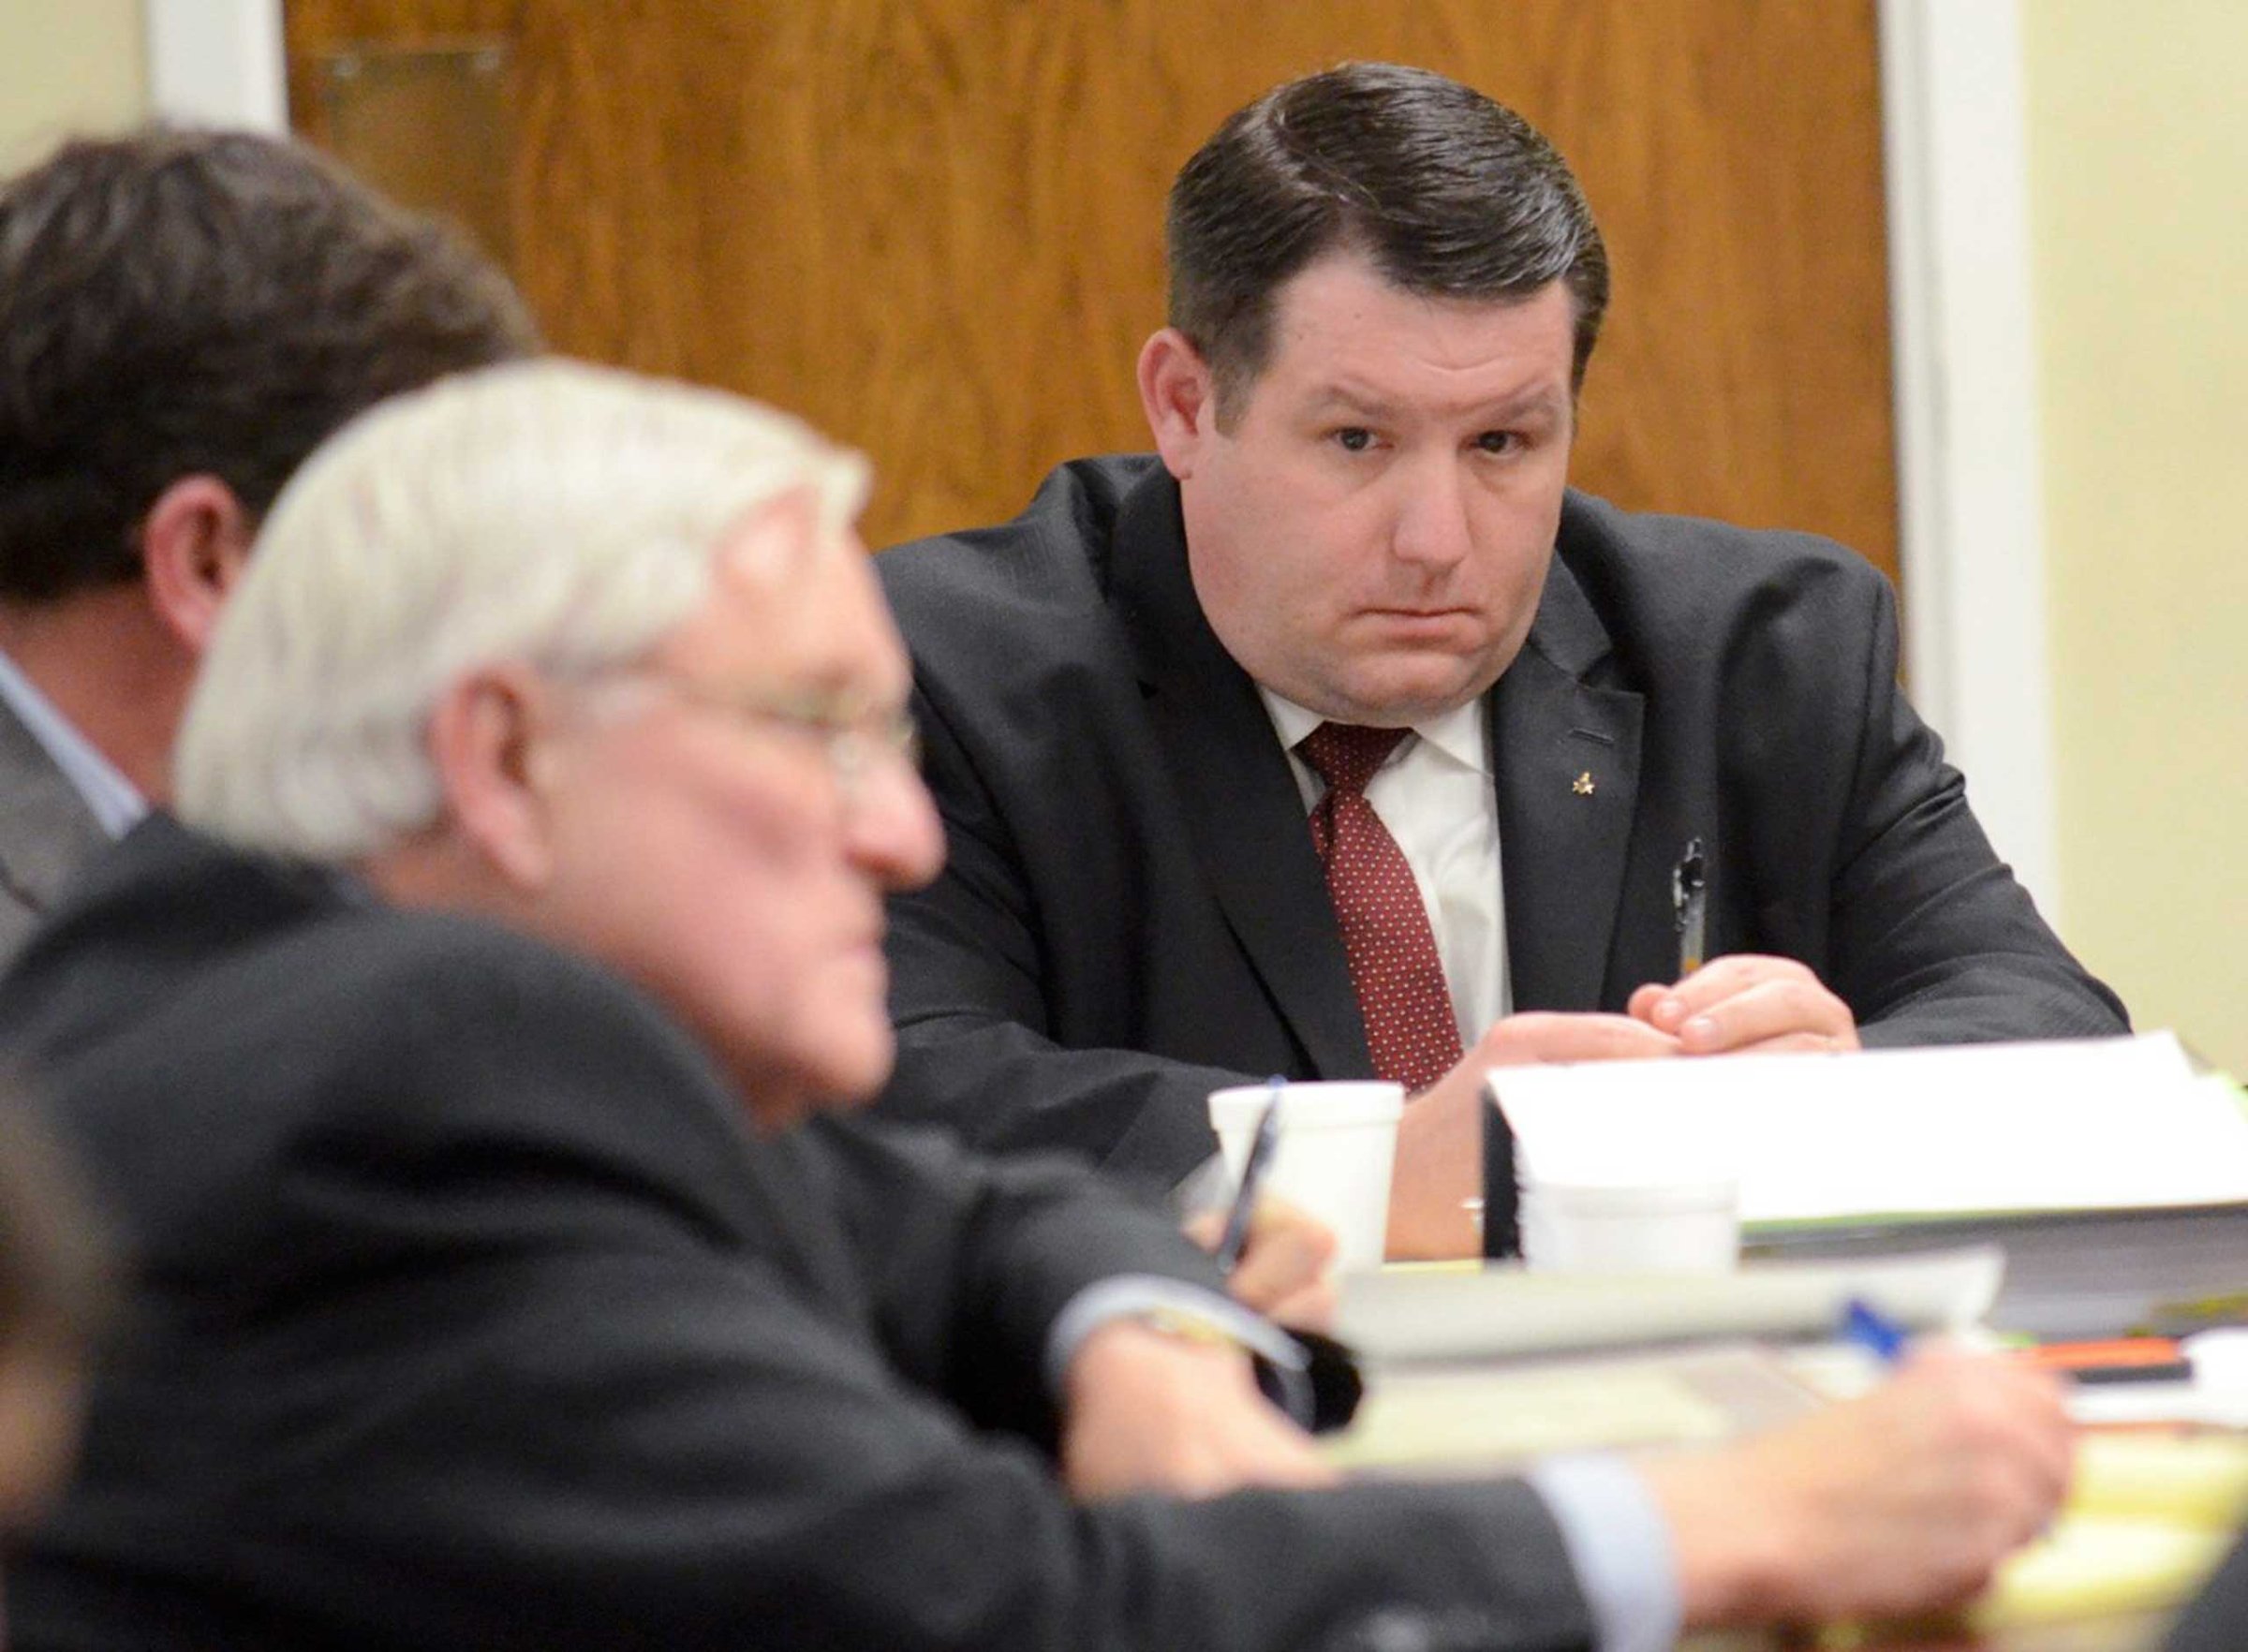 Former Eutawville Police Chief Richard Combs sits with lawyers on the second day of testimony in his trial for the murder of Bernard Bailey in Orangeburg, South Carolina, Jan. 8, 2015.